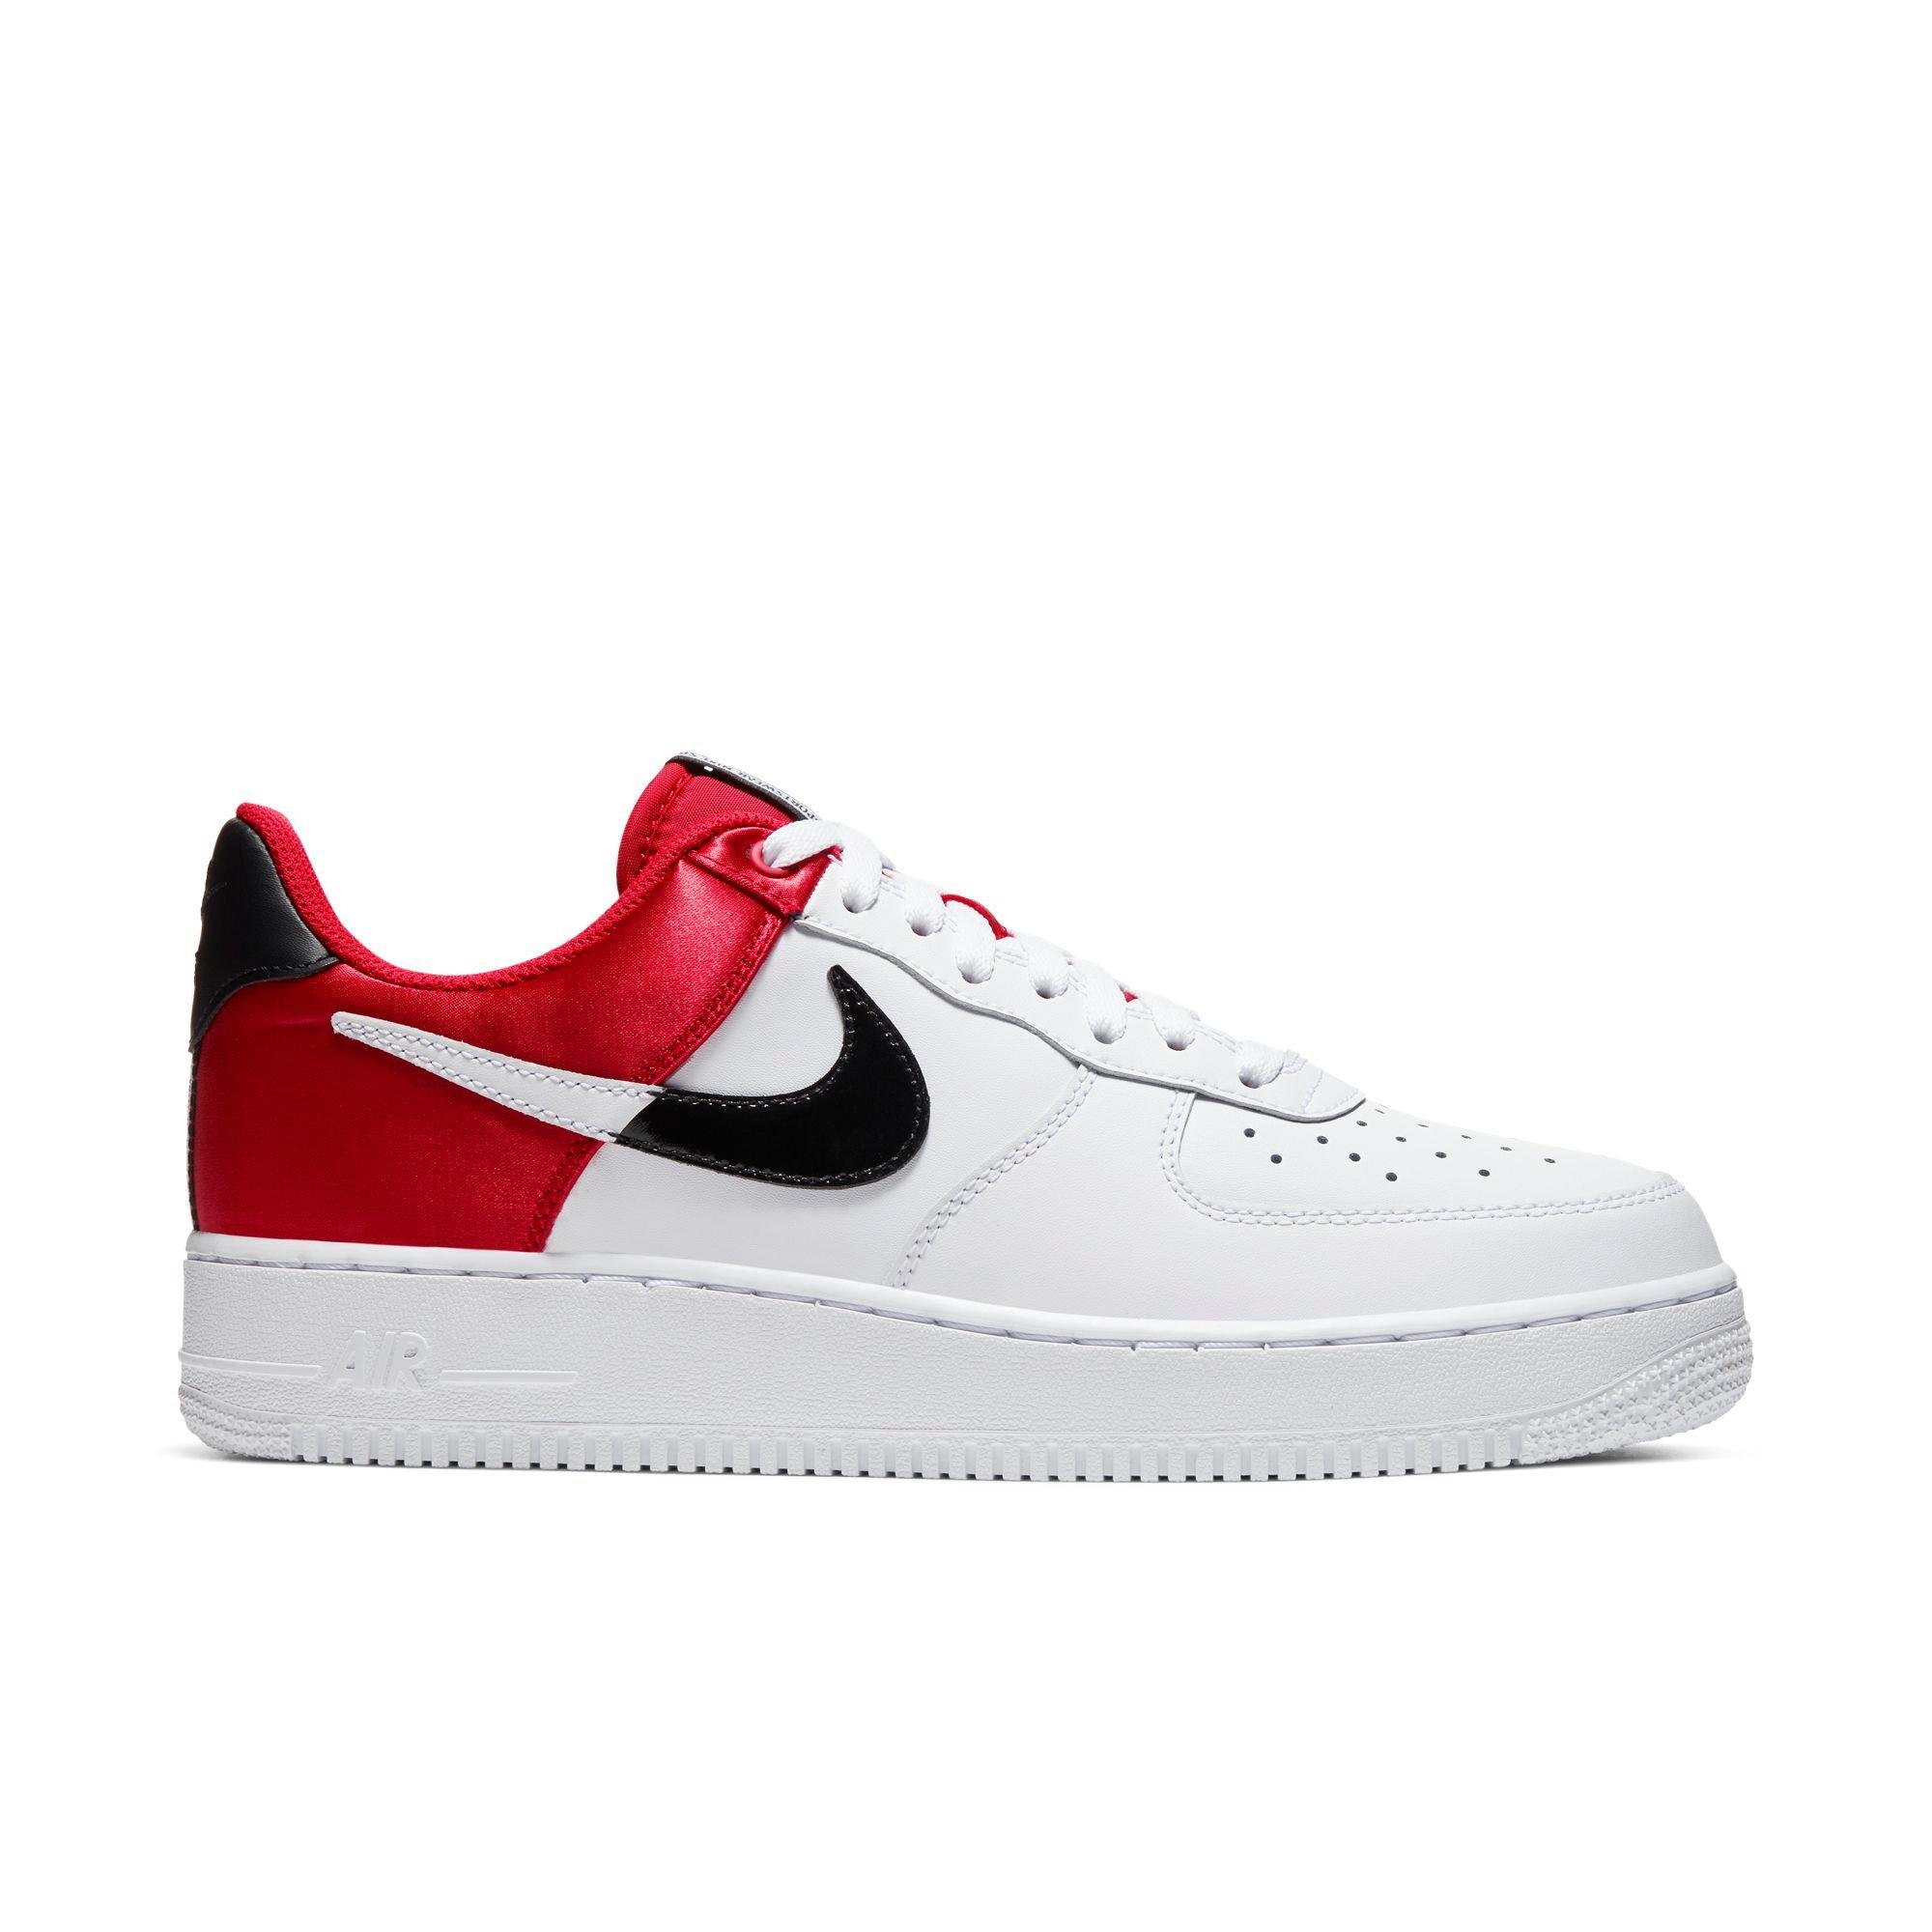 nike air force 1 07 lv8 university red white blue